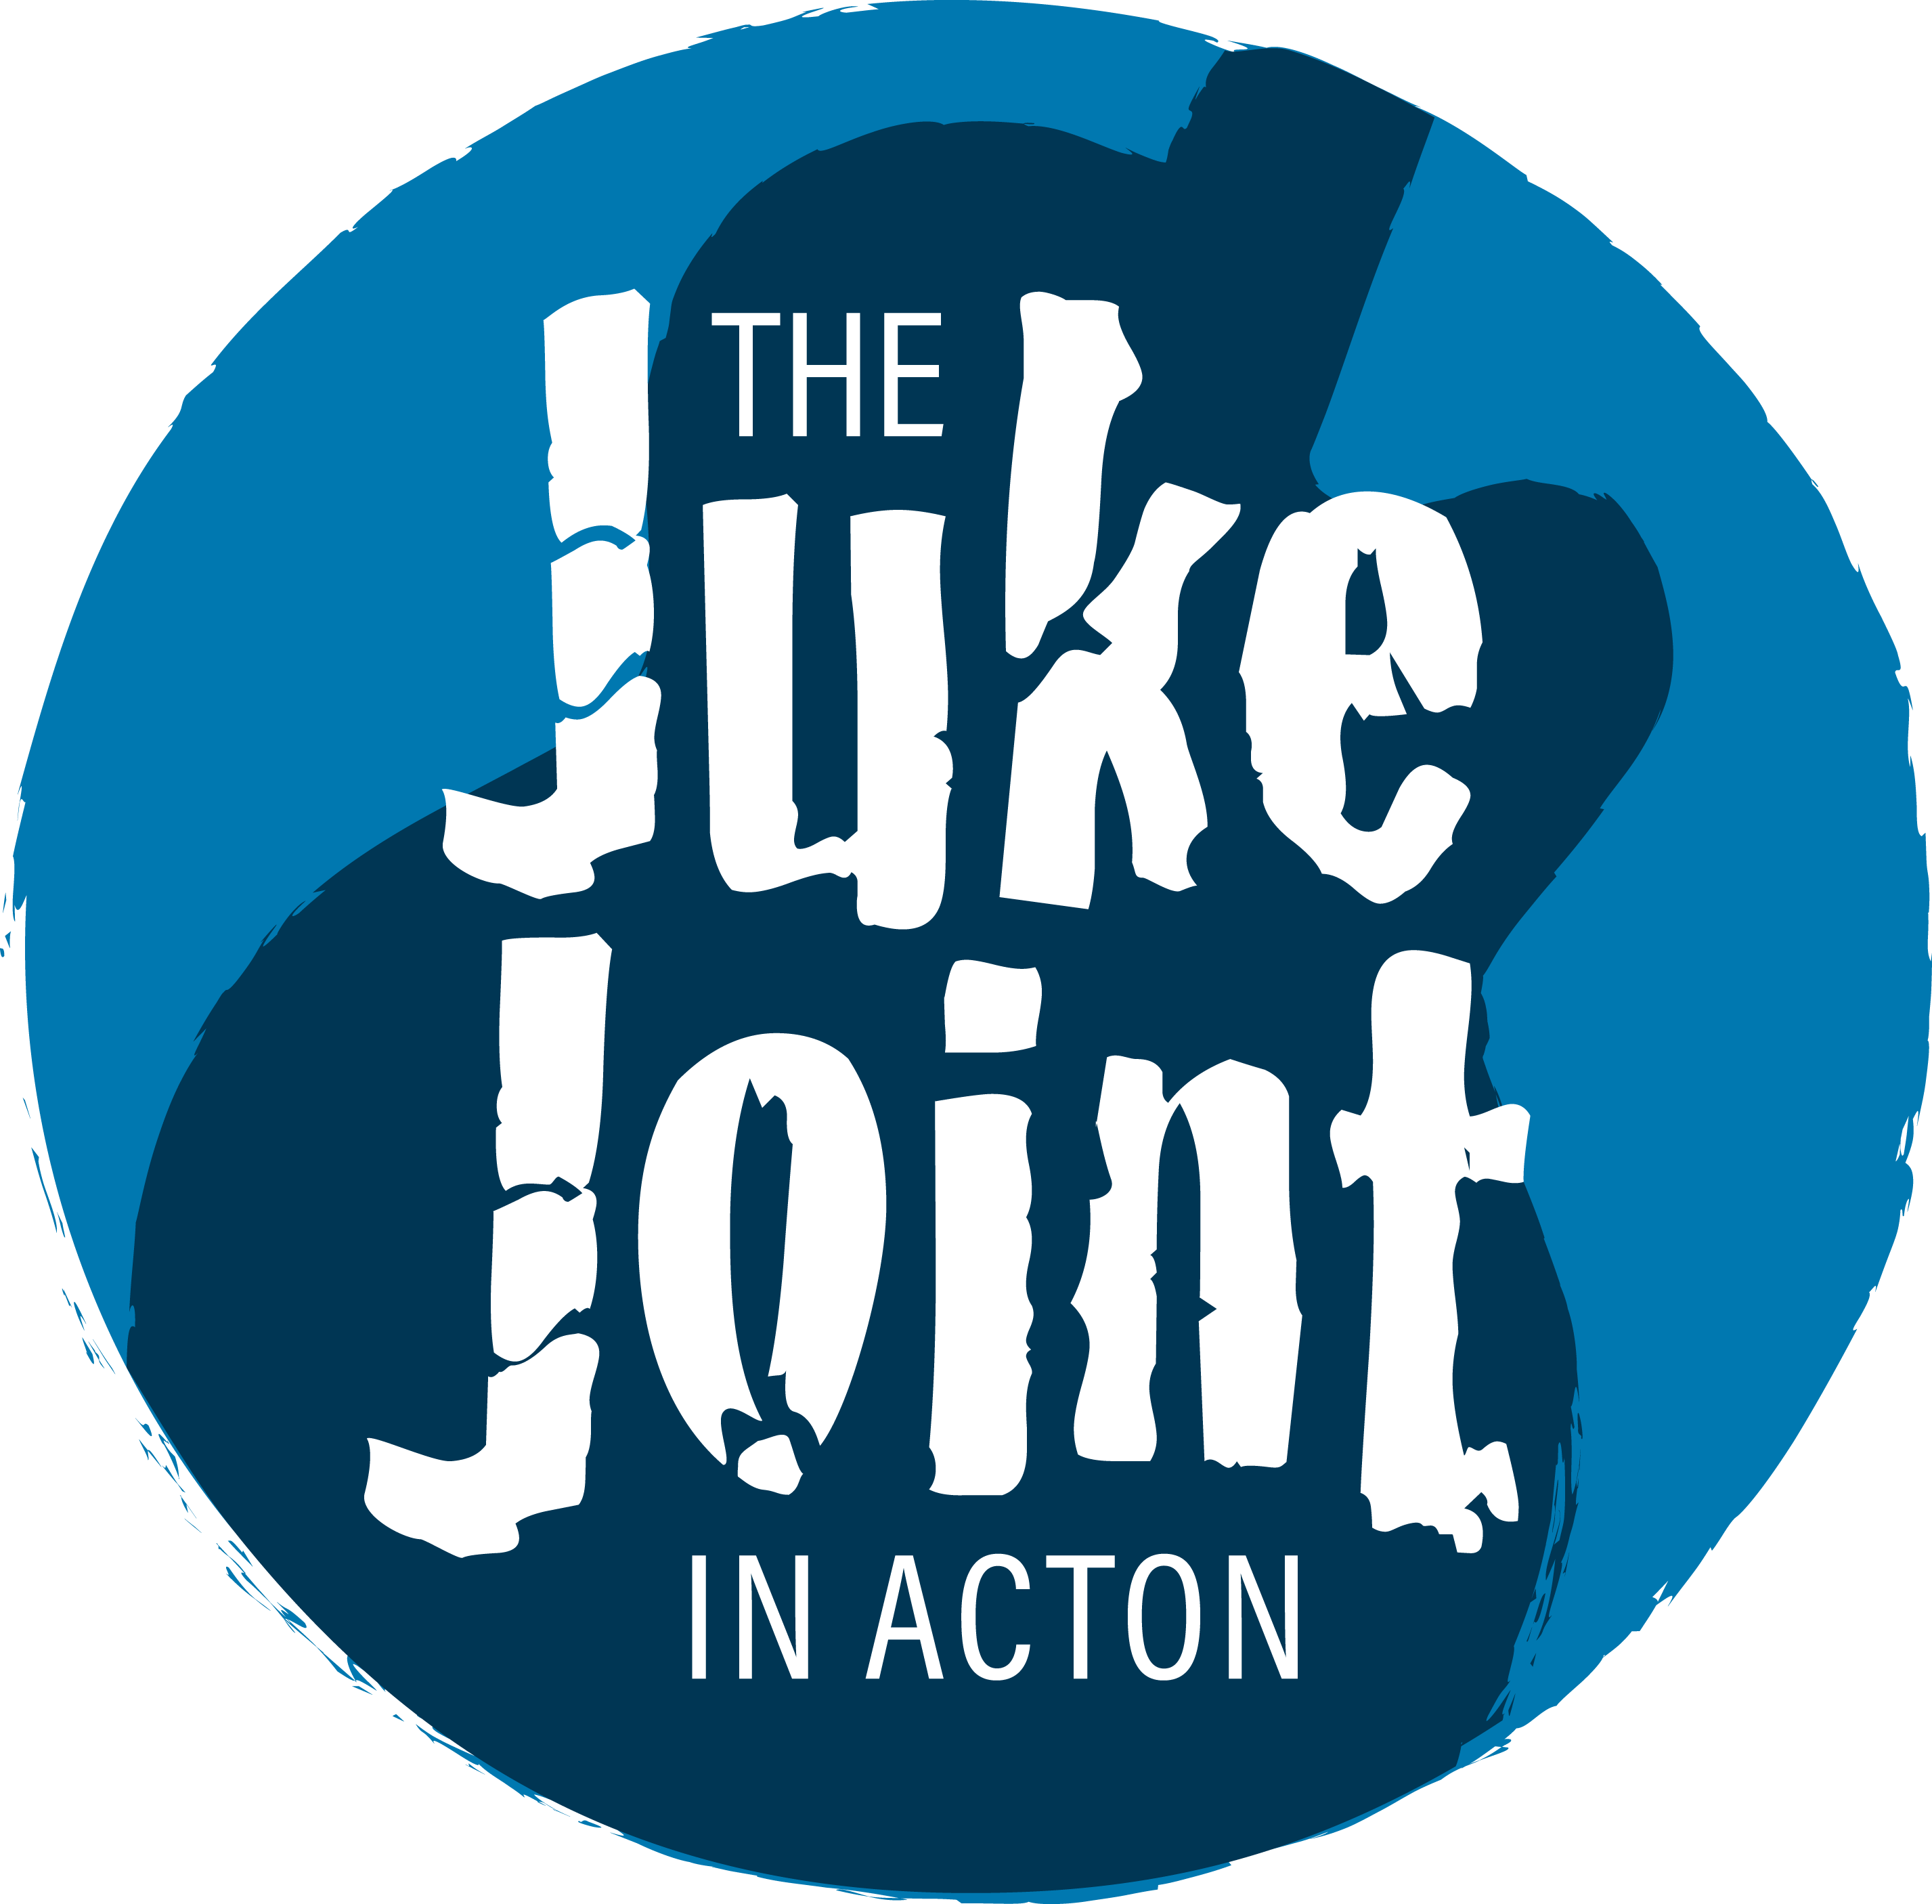 Juke Joint in Acton